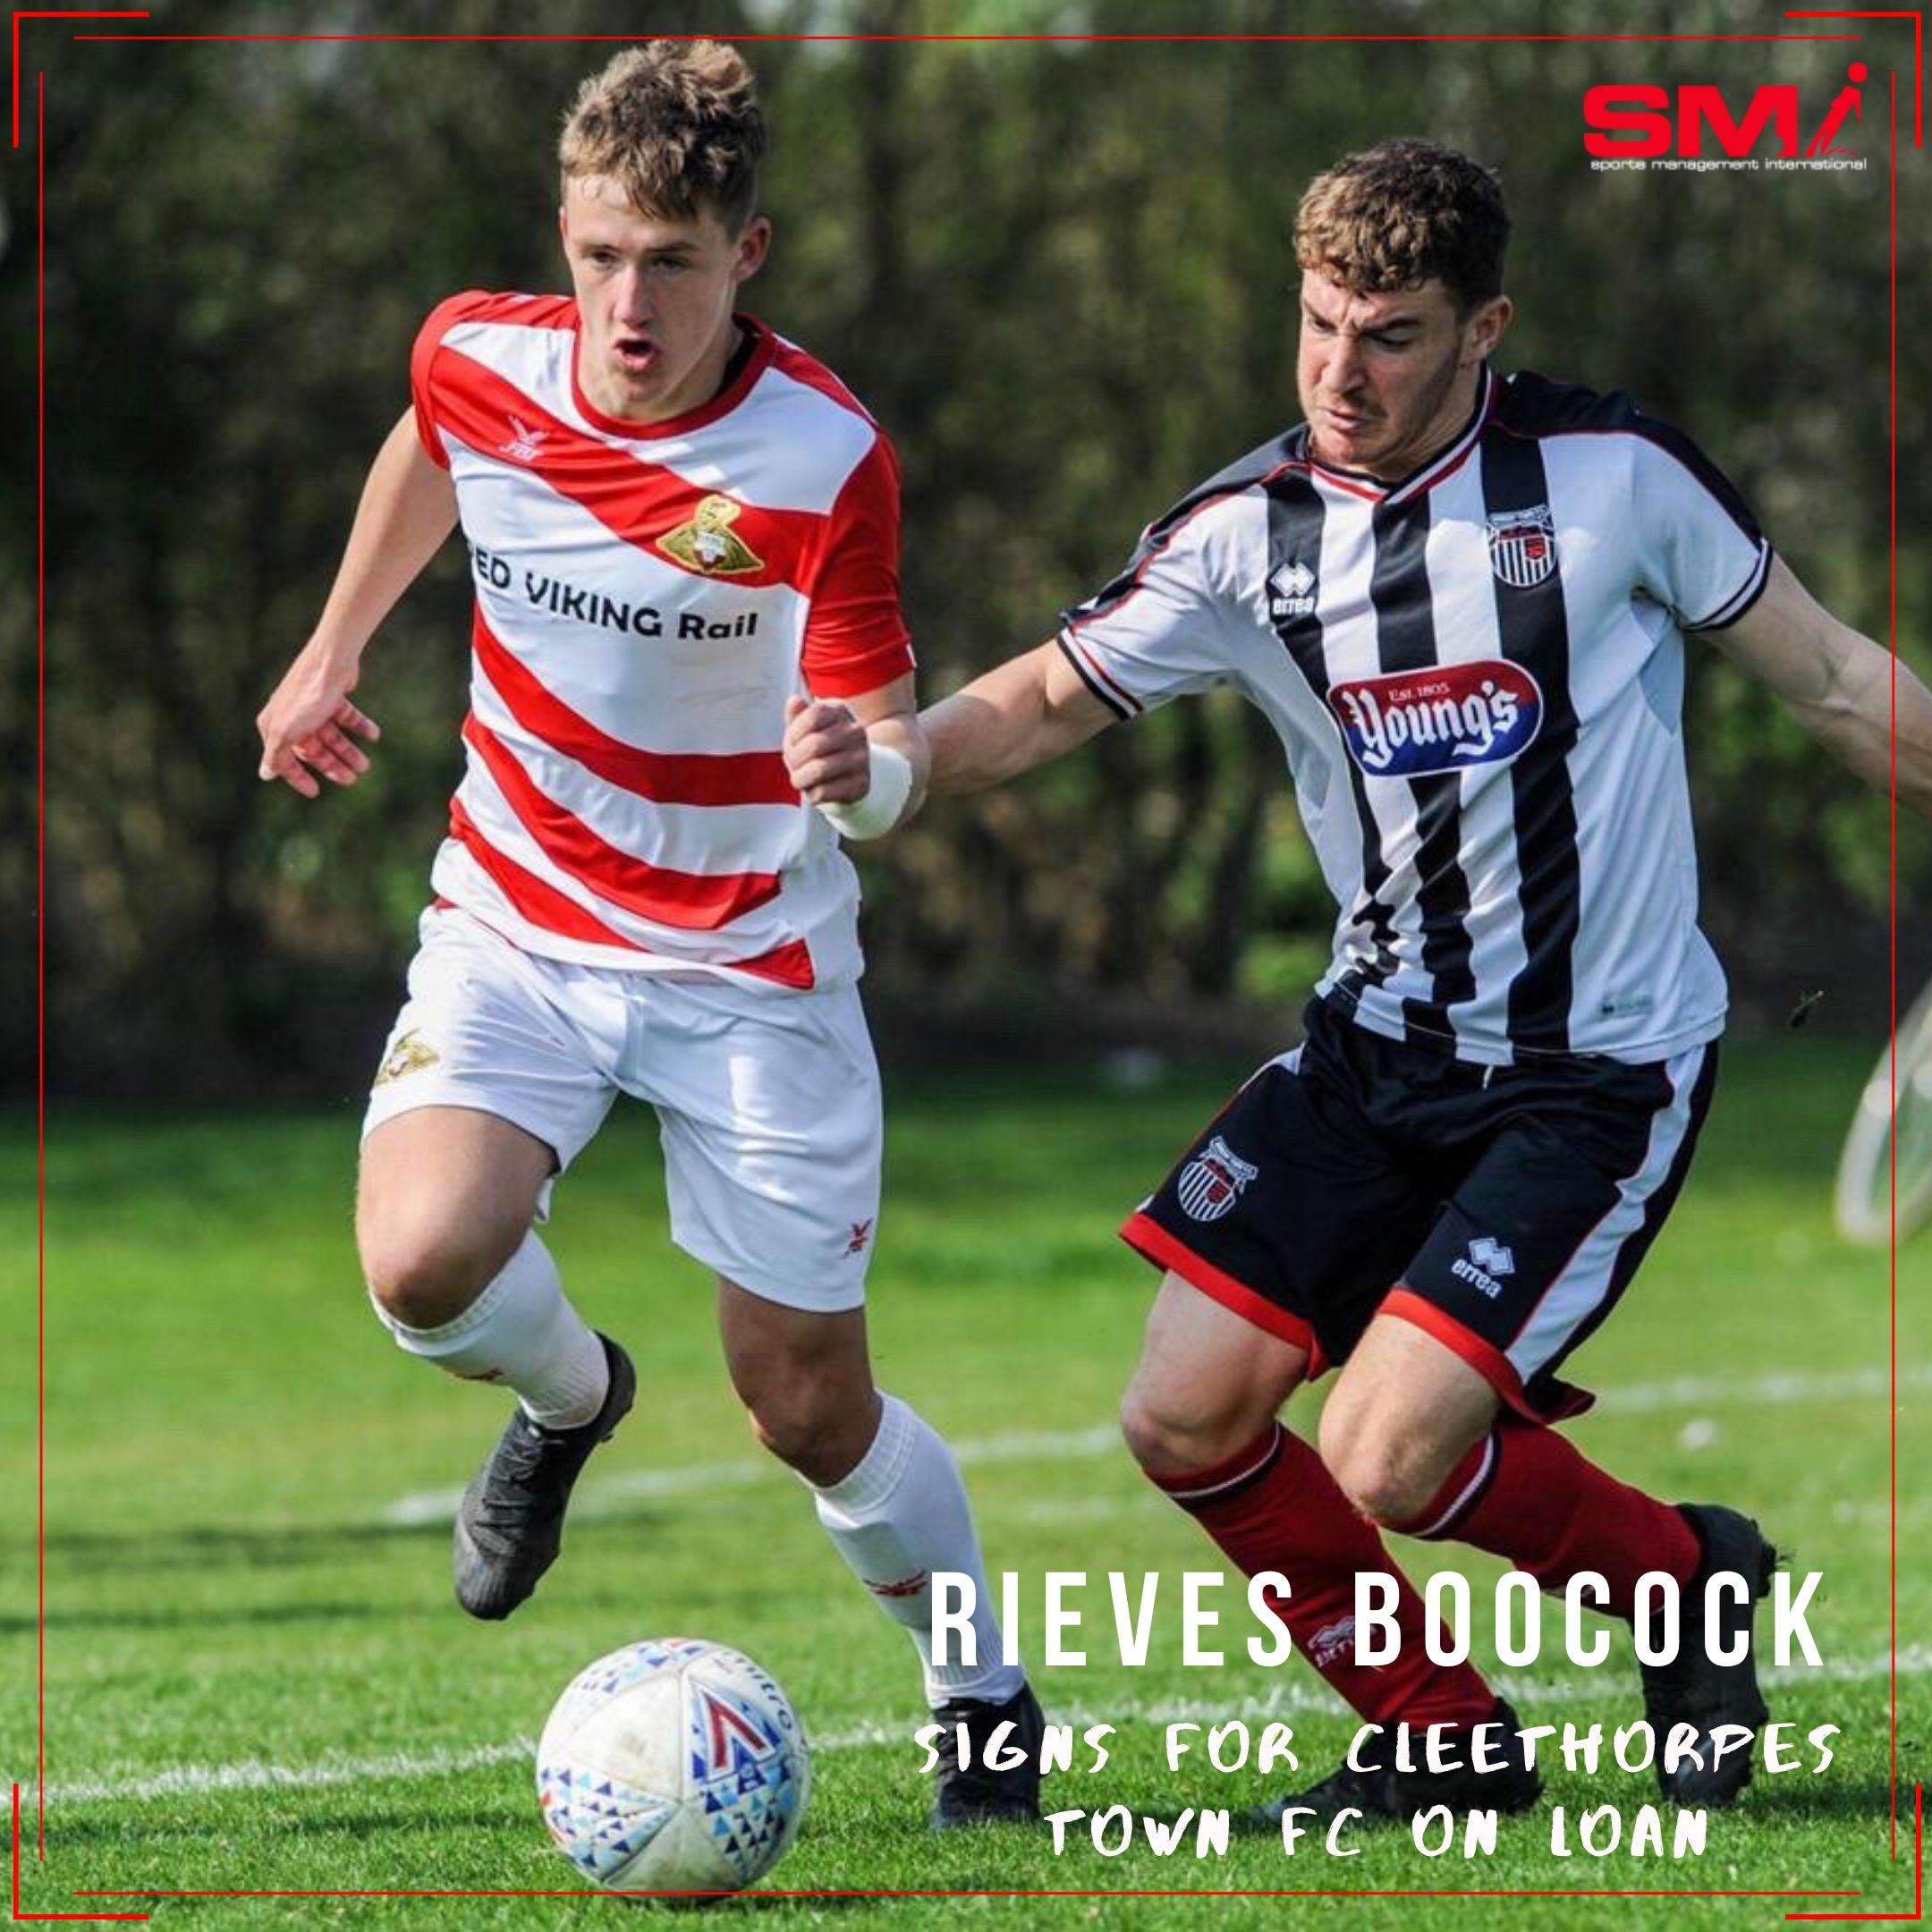 Rieves Boocock goes on loan